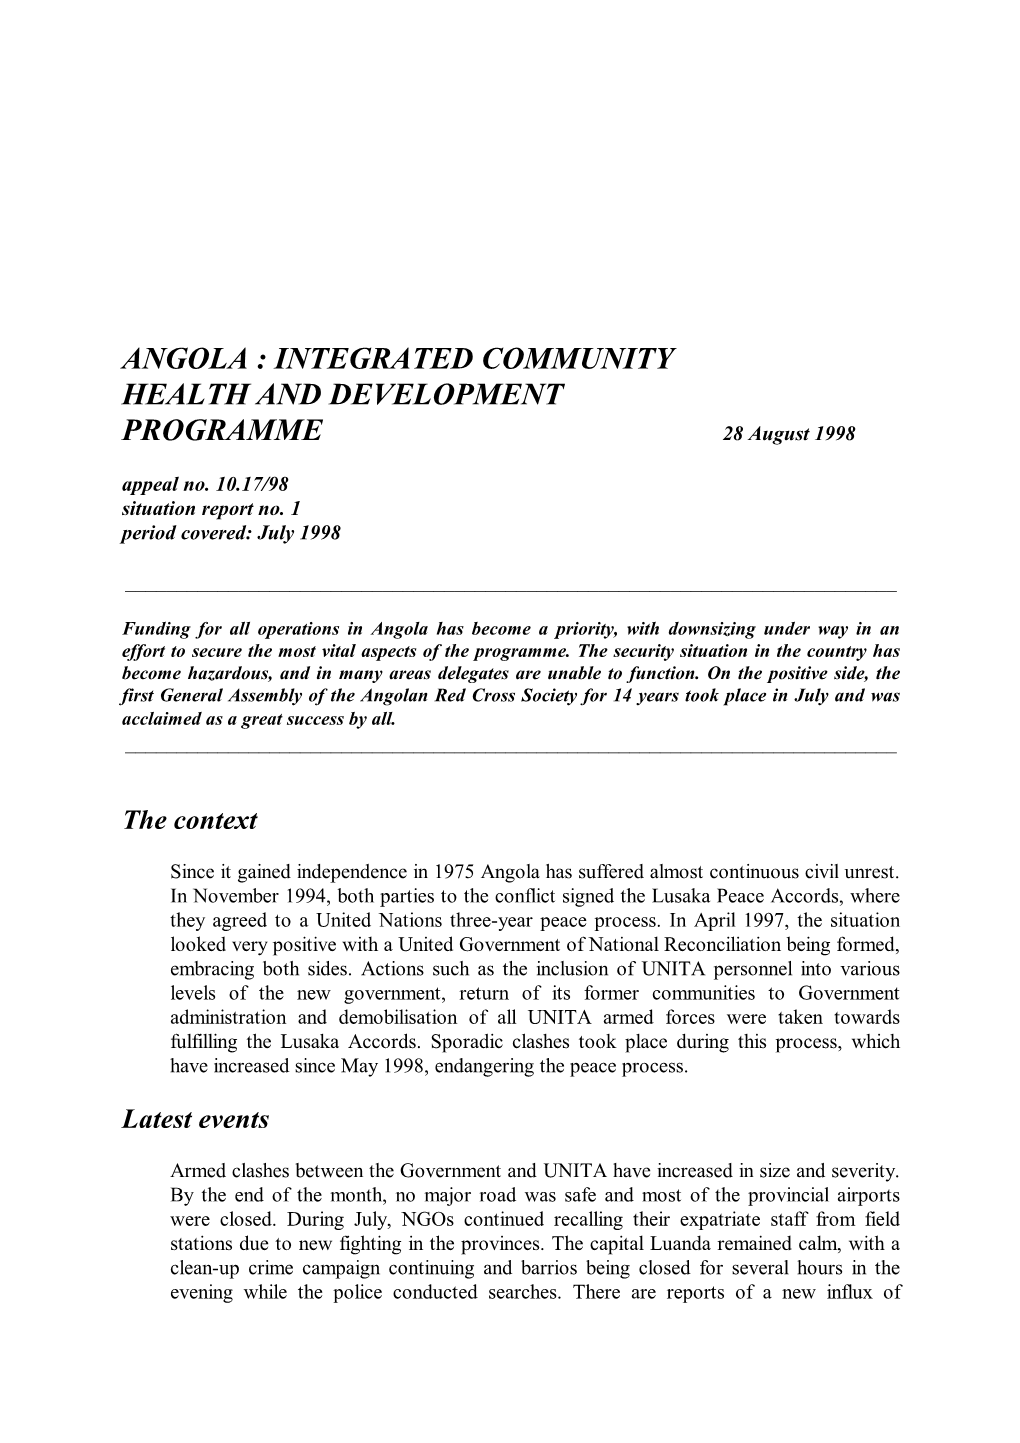 ANGOLA : INTEGRATED COMMUNITY HEALTH and DEVELOPMENT PROGRAMME 28 August 1998 Appeal No